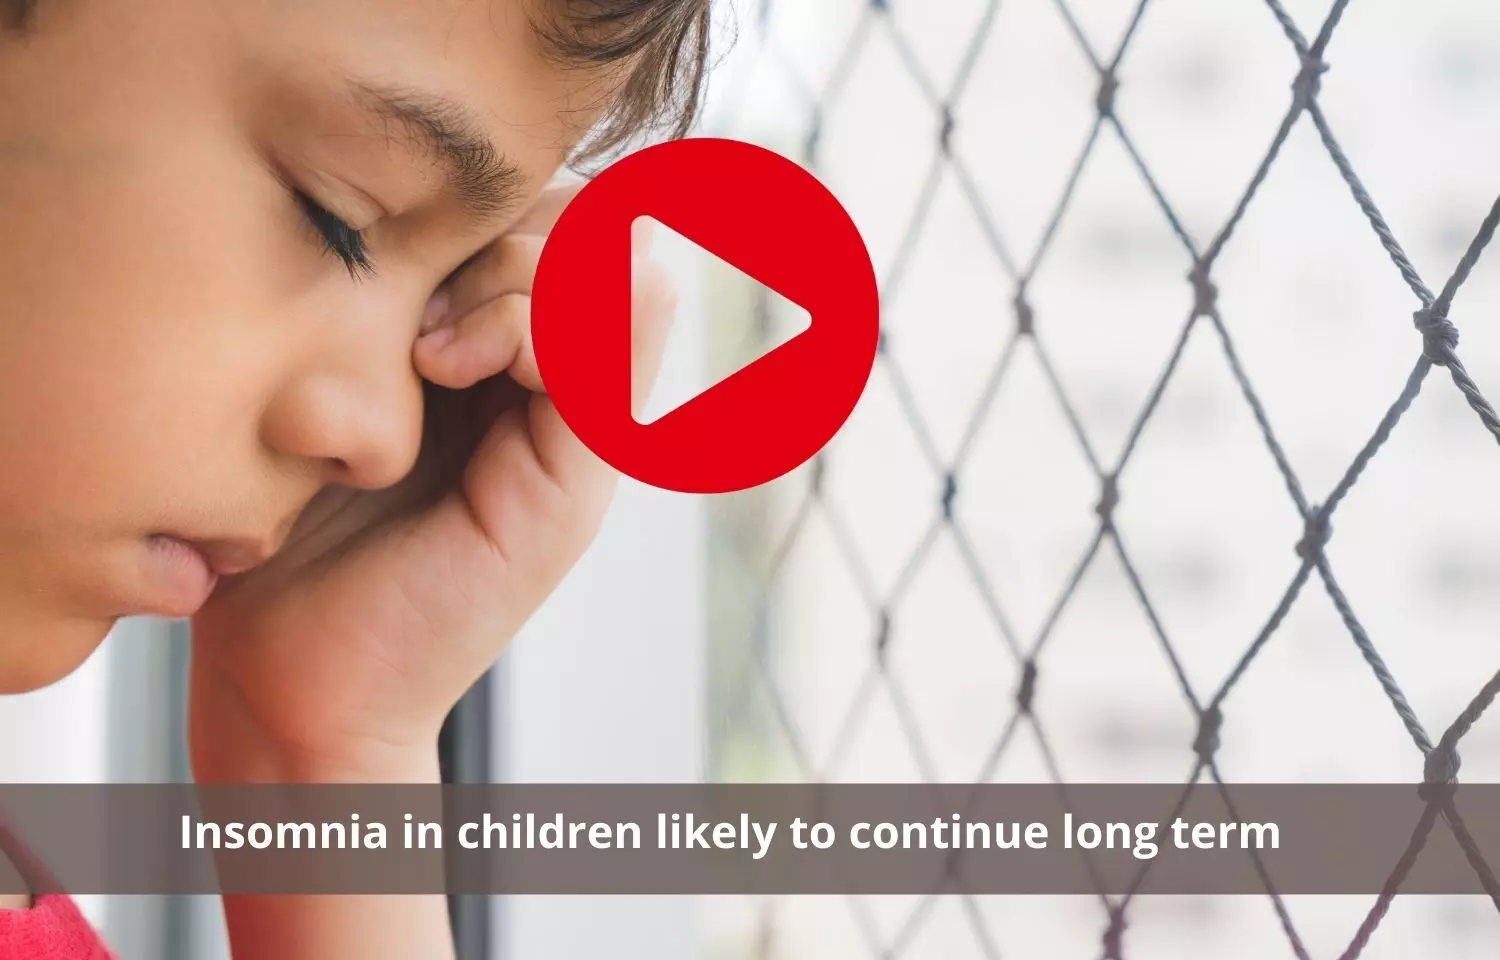 Insomnia to affect children long term continuing to adulthood